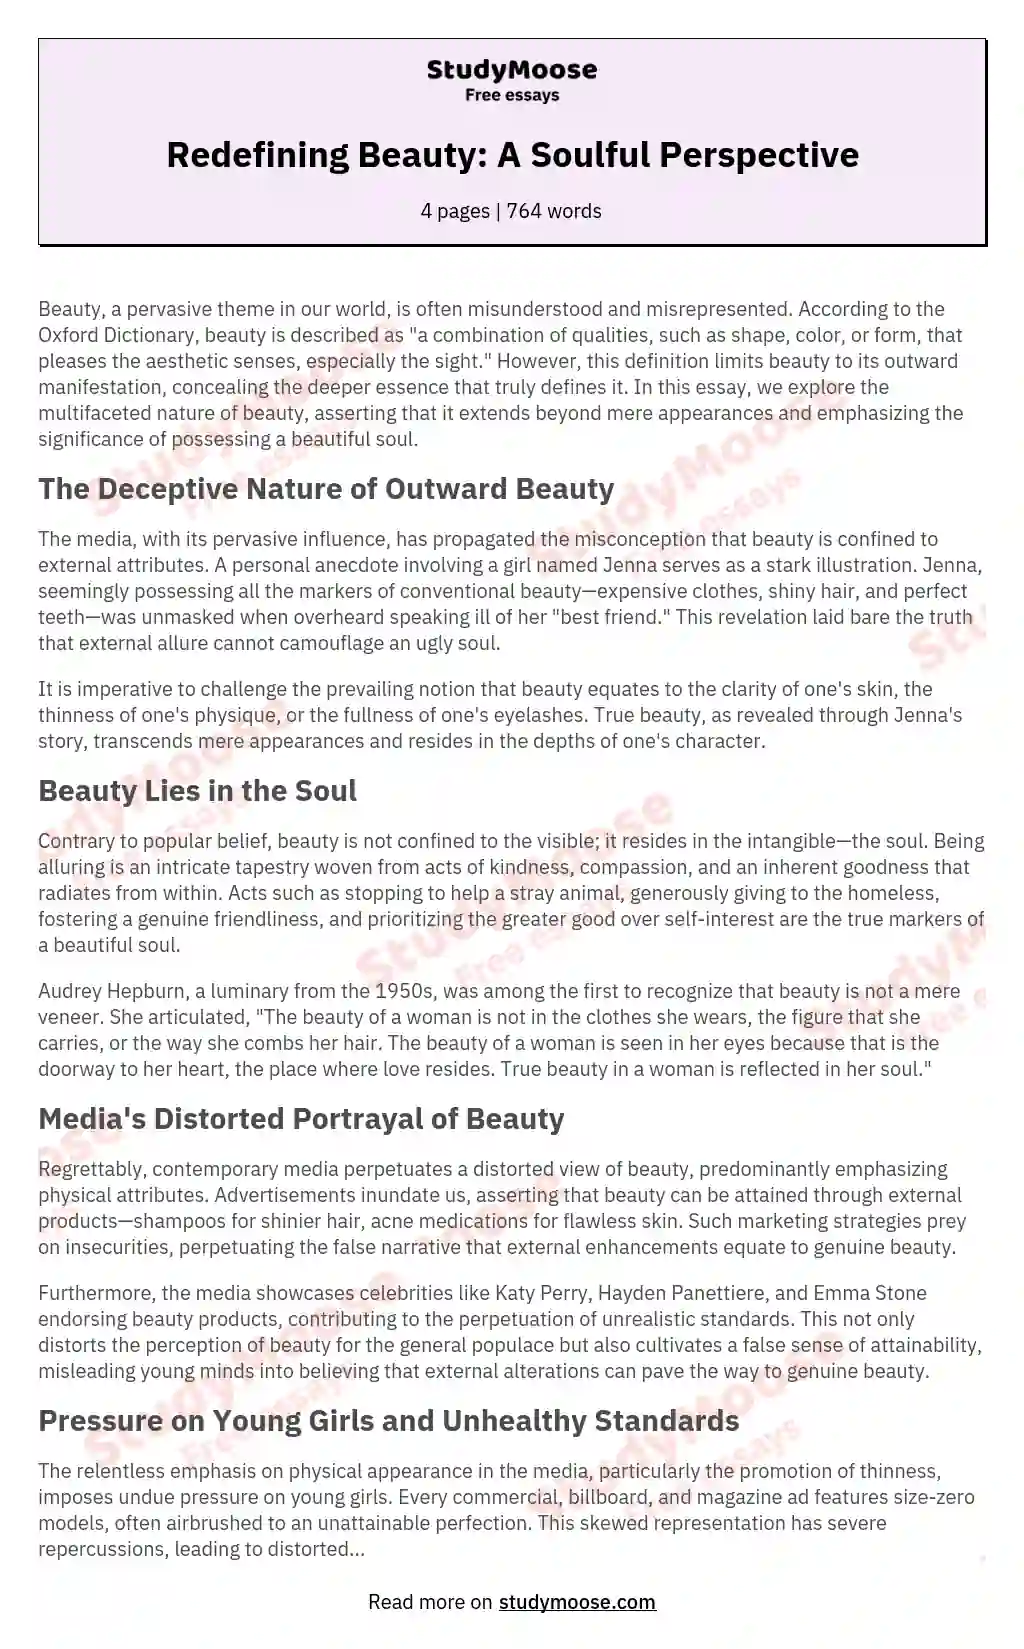 Redefining Beauty: A Soulful Perspective essay